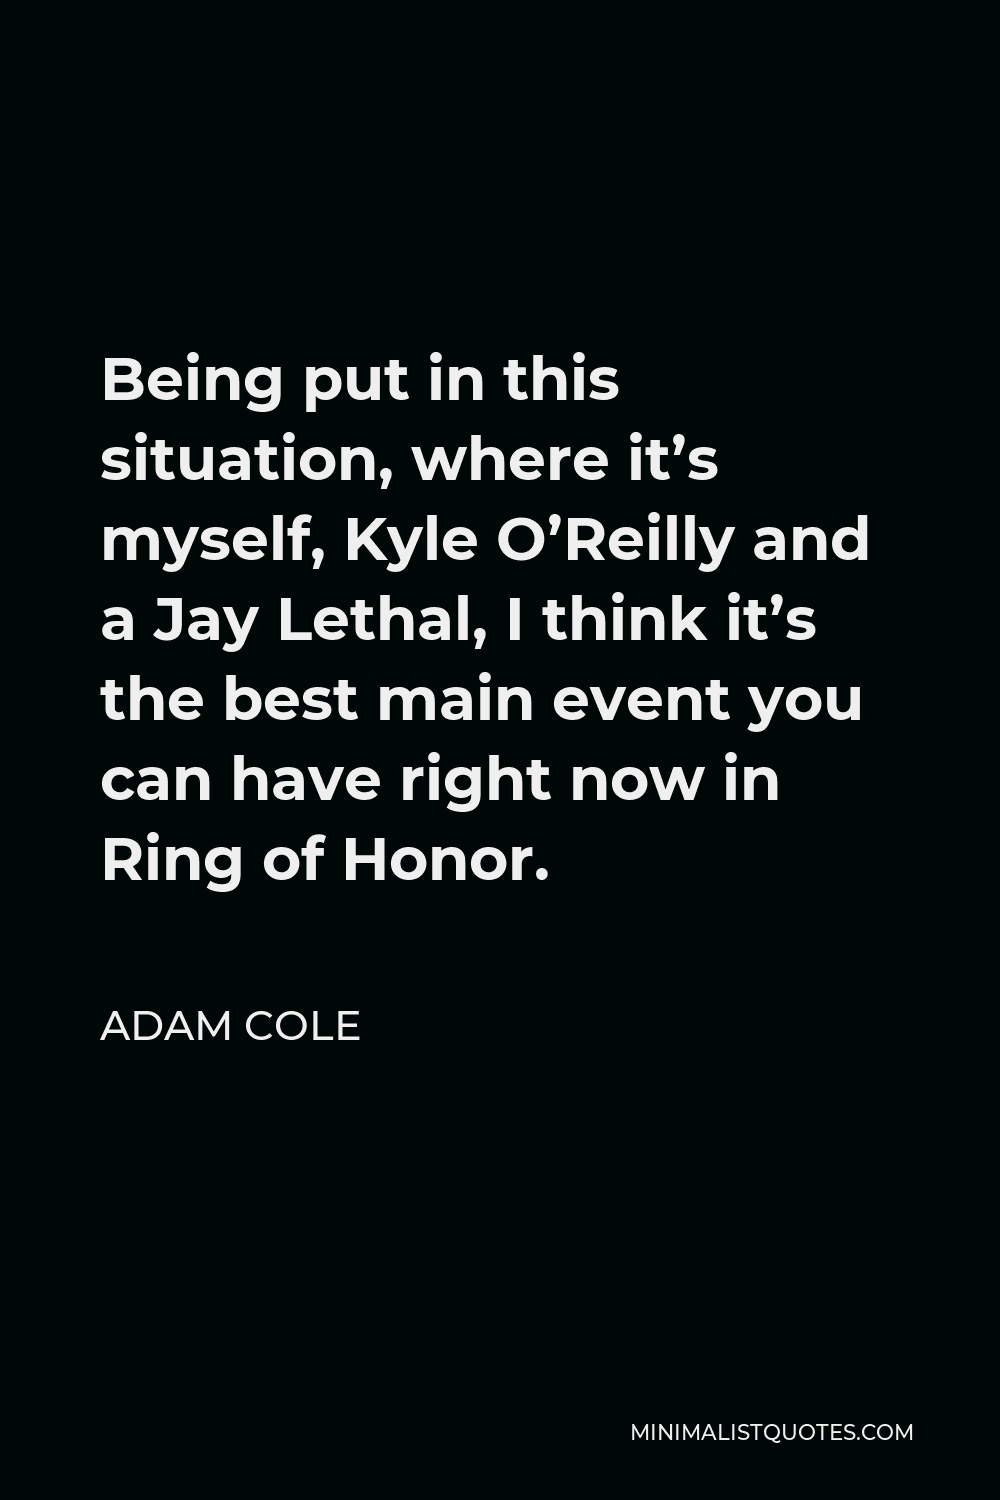 Adam Cole Quote - Being put in this situation, where it’s myself, Kyle O’Reilly and a Jay Lethal, I think it’s the best main event you can have right now in Ring of Honor.